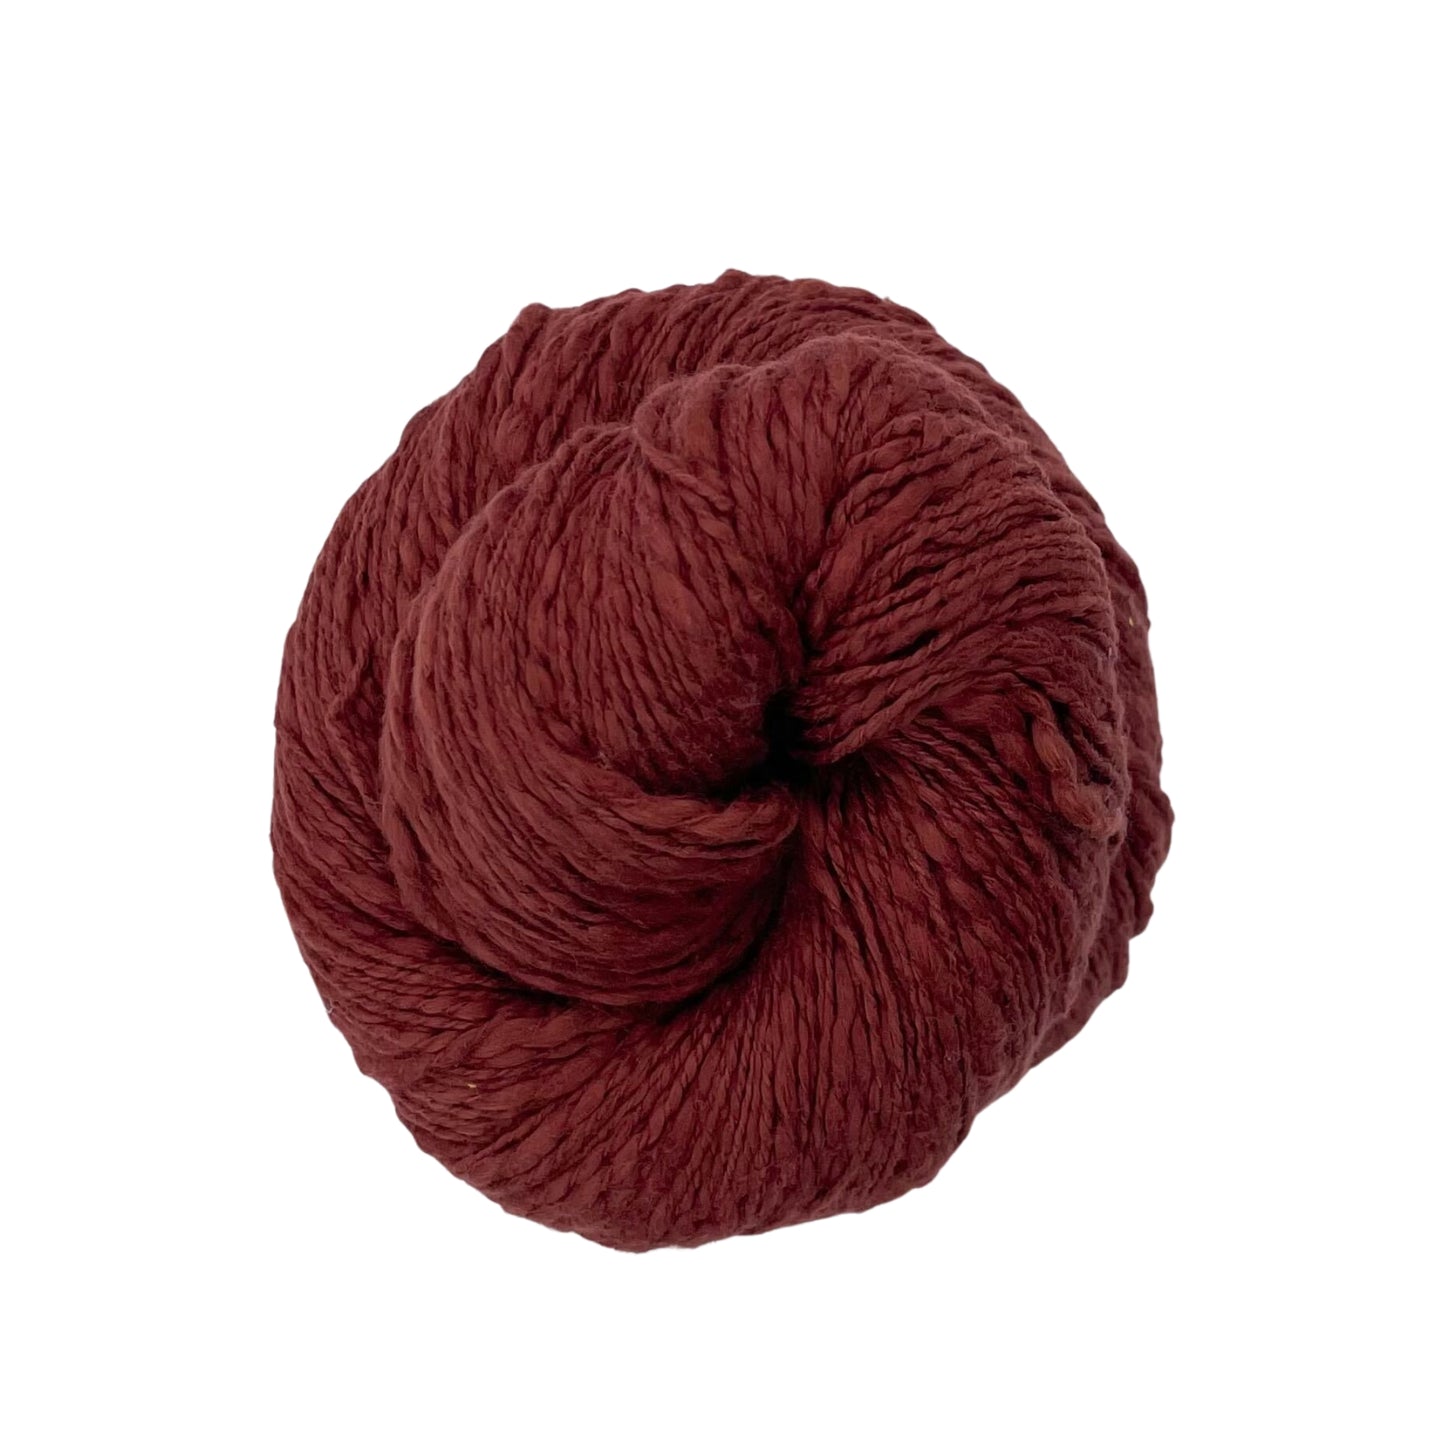 A skein of brown cotton yarn on a white background